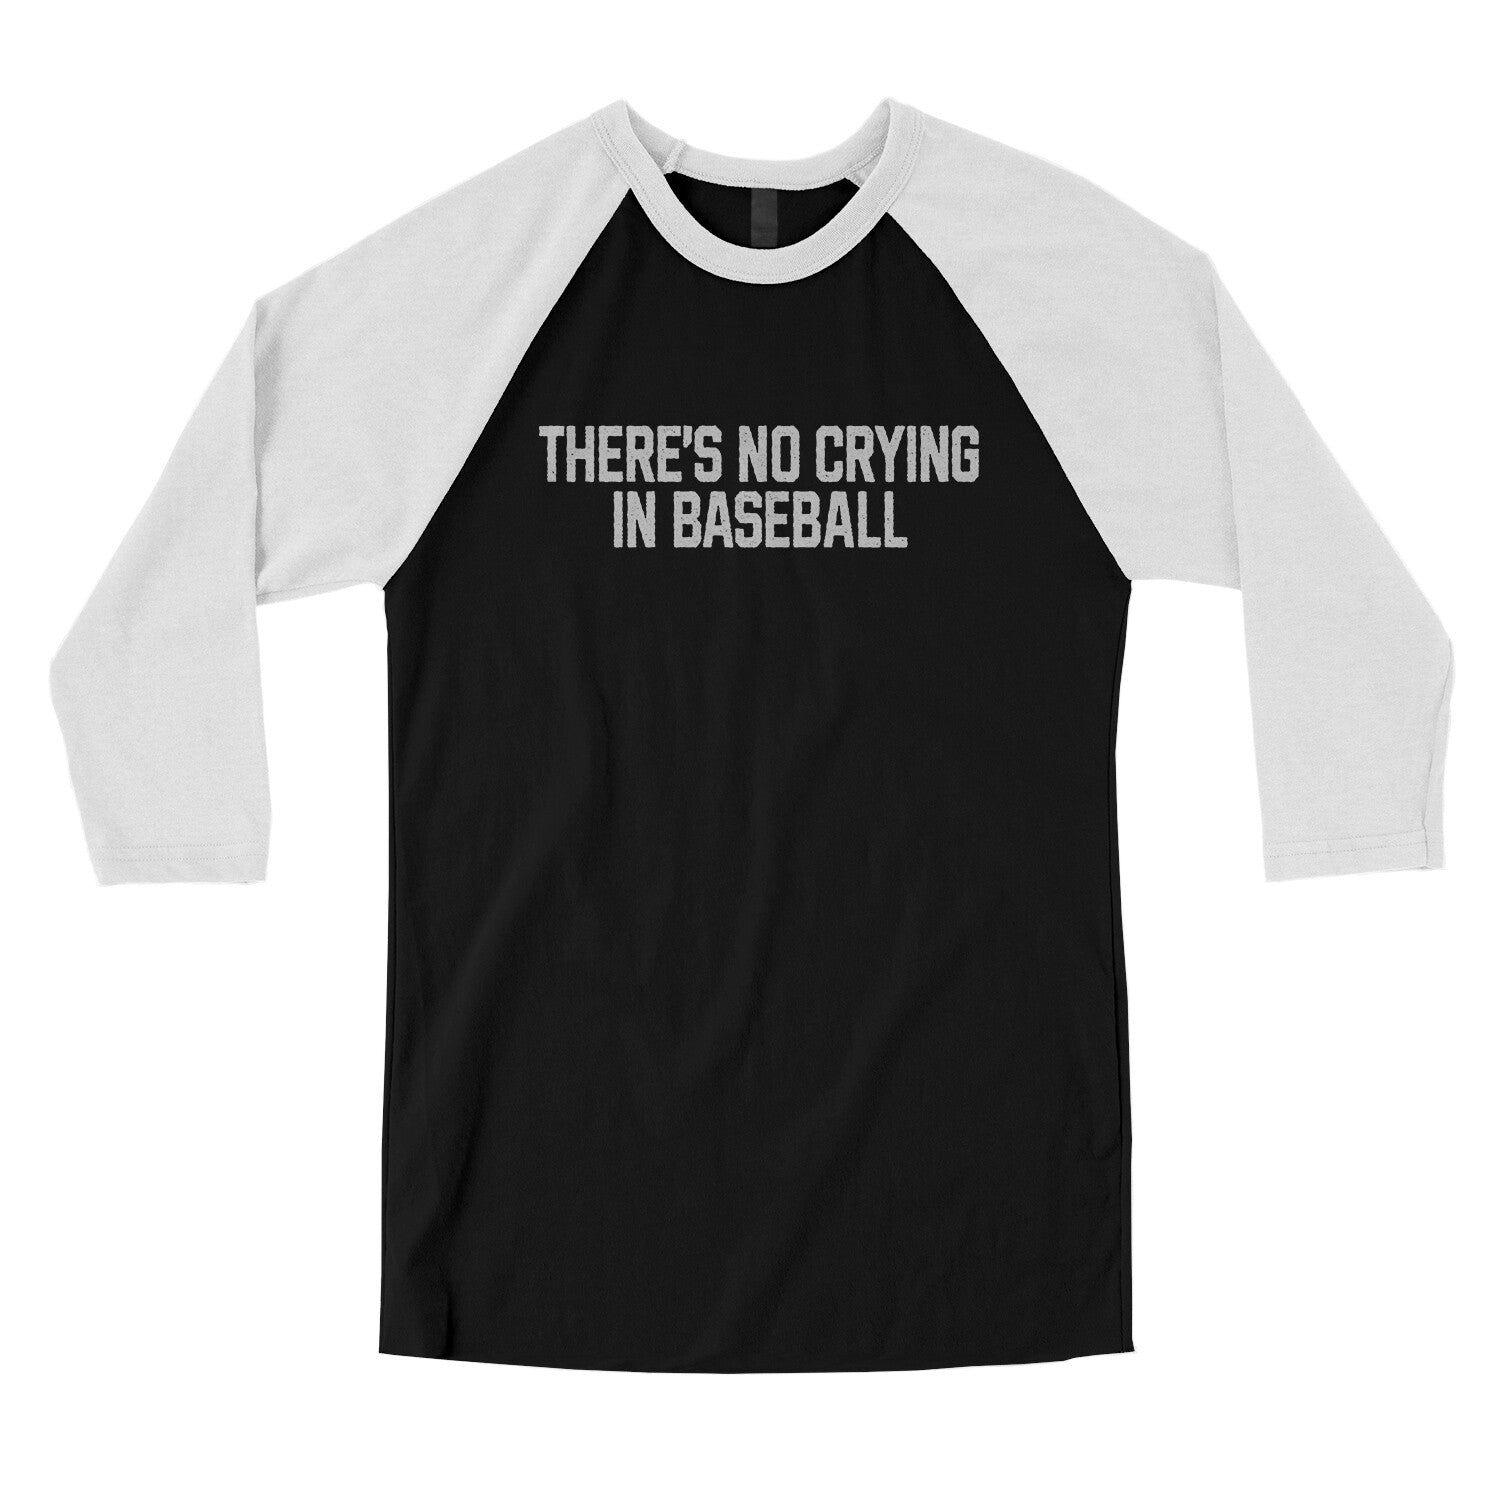 There's No Crying in Baseball in Black with White Color